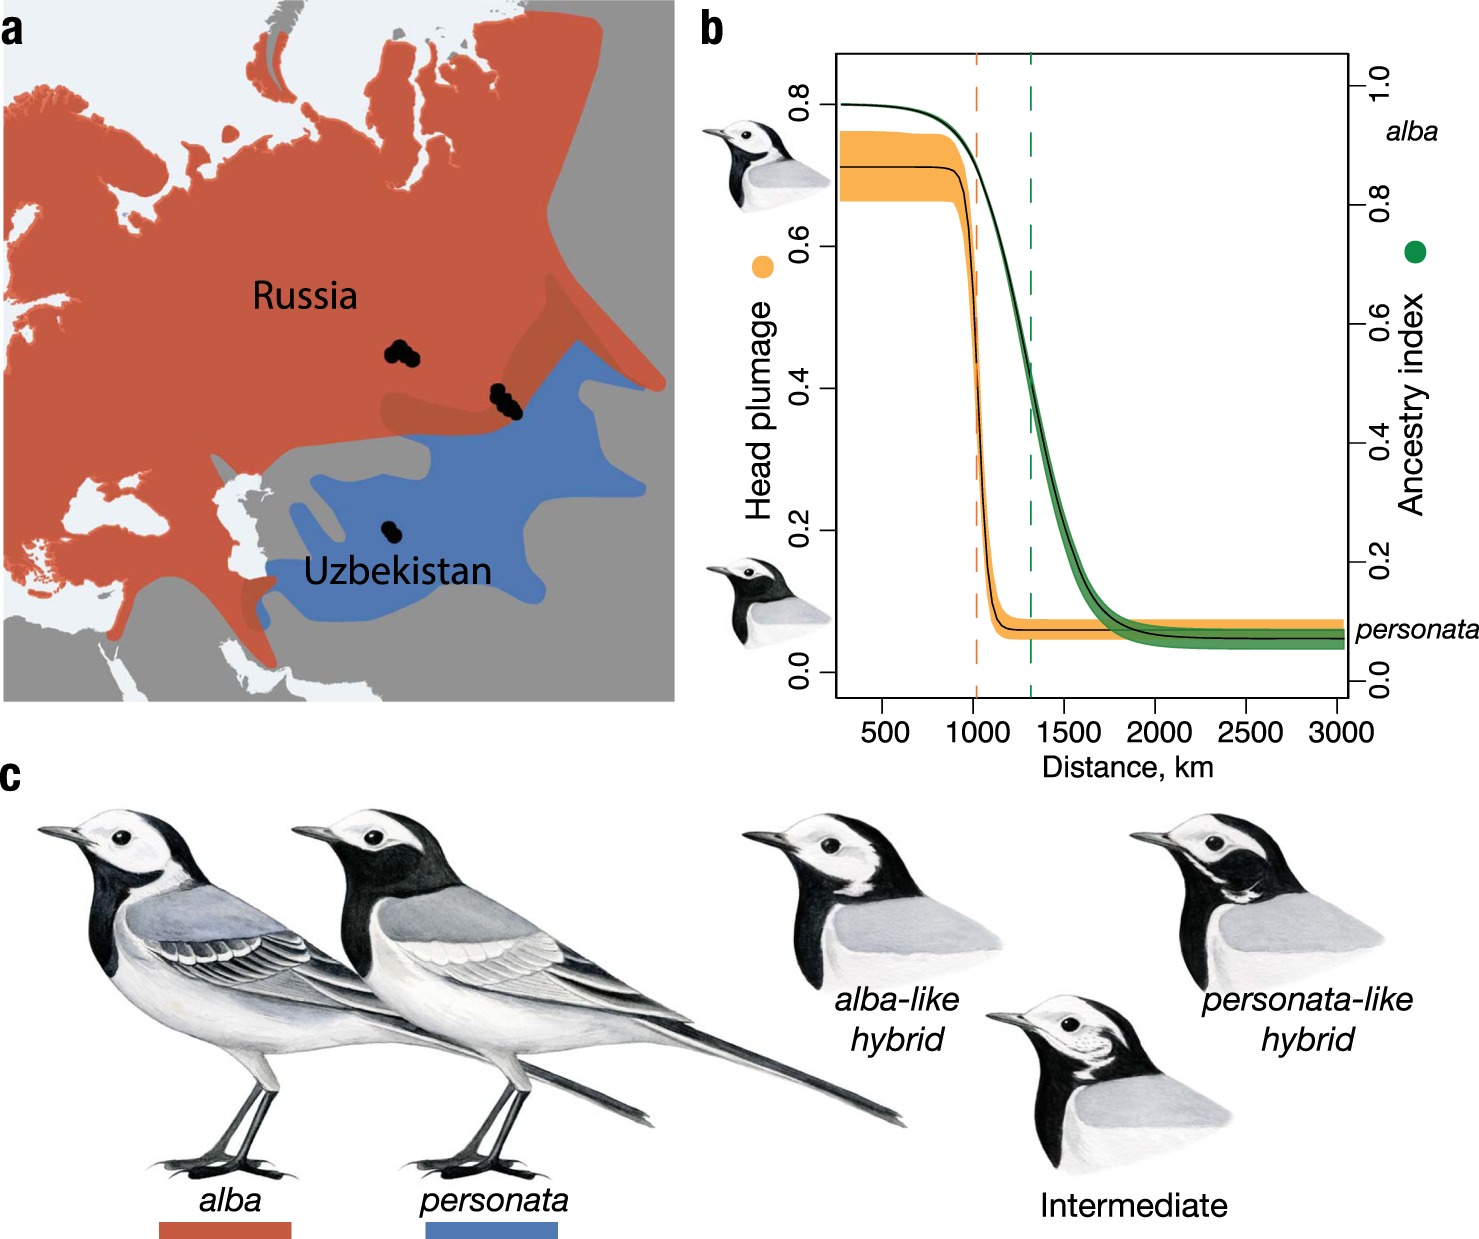 introgression reveals the genetic architecture of a plumage trait | Nature Communications